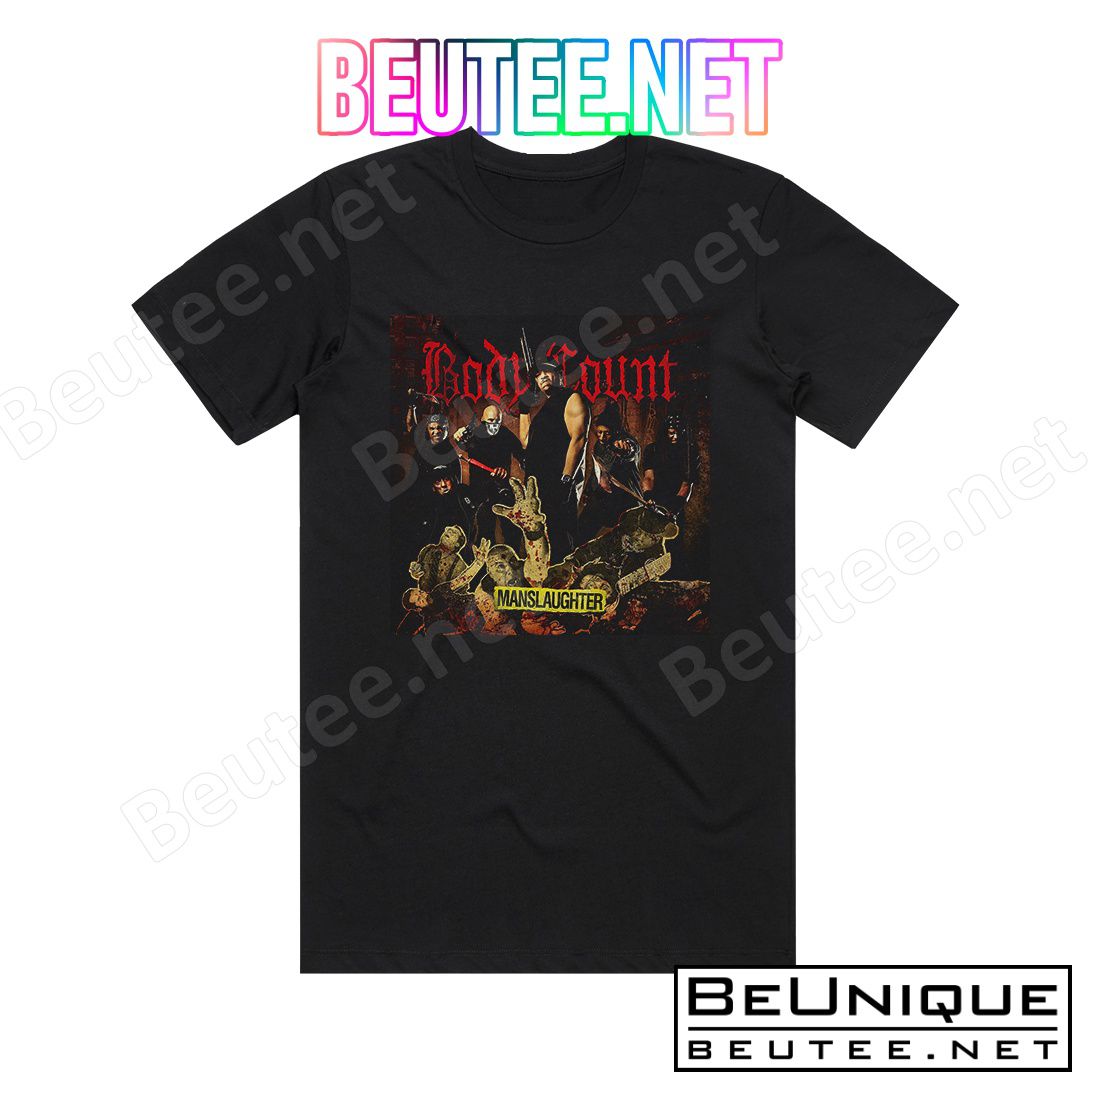 Body Count Manslaughter 1 Album Cover T-Shirt